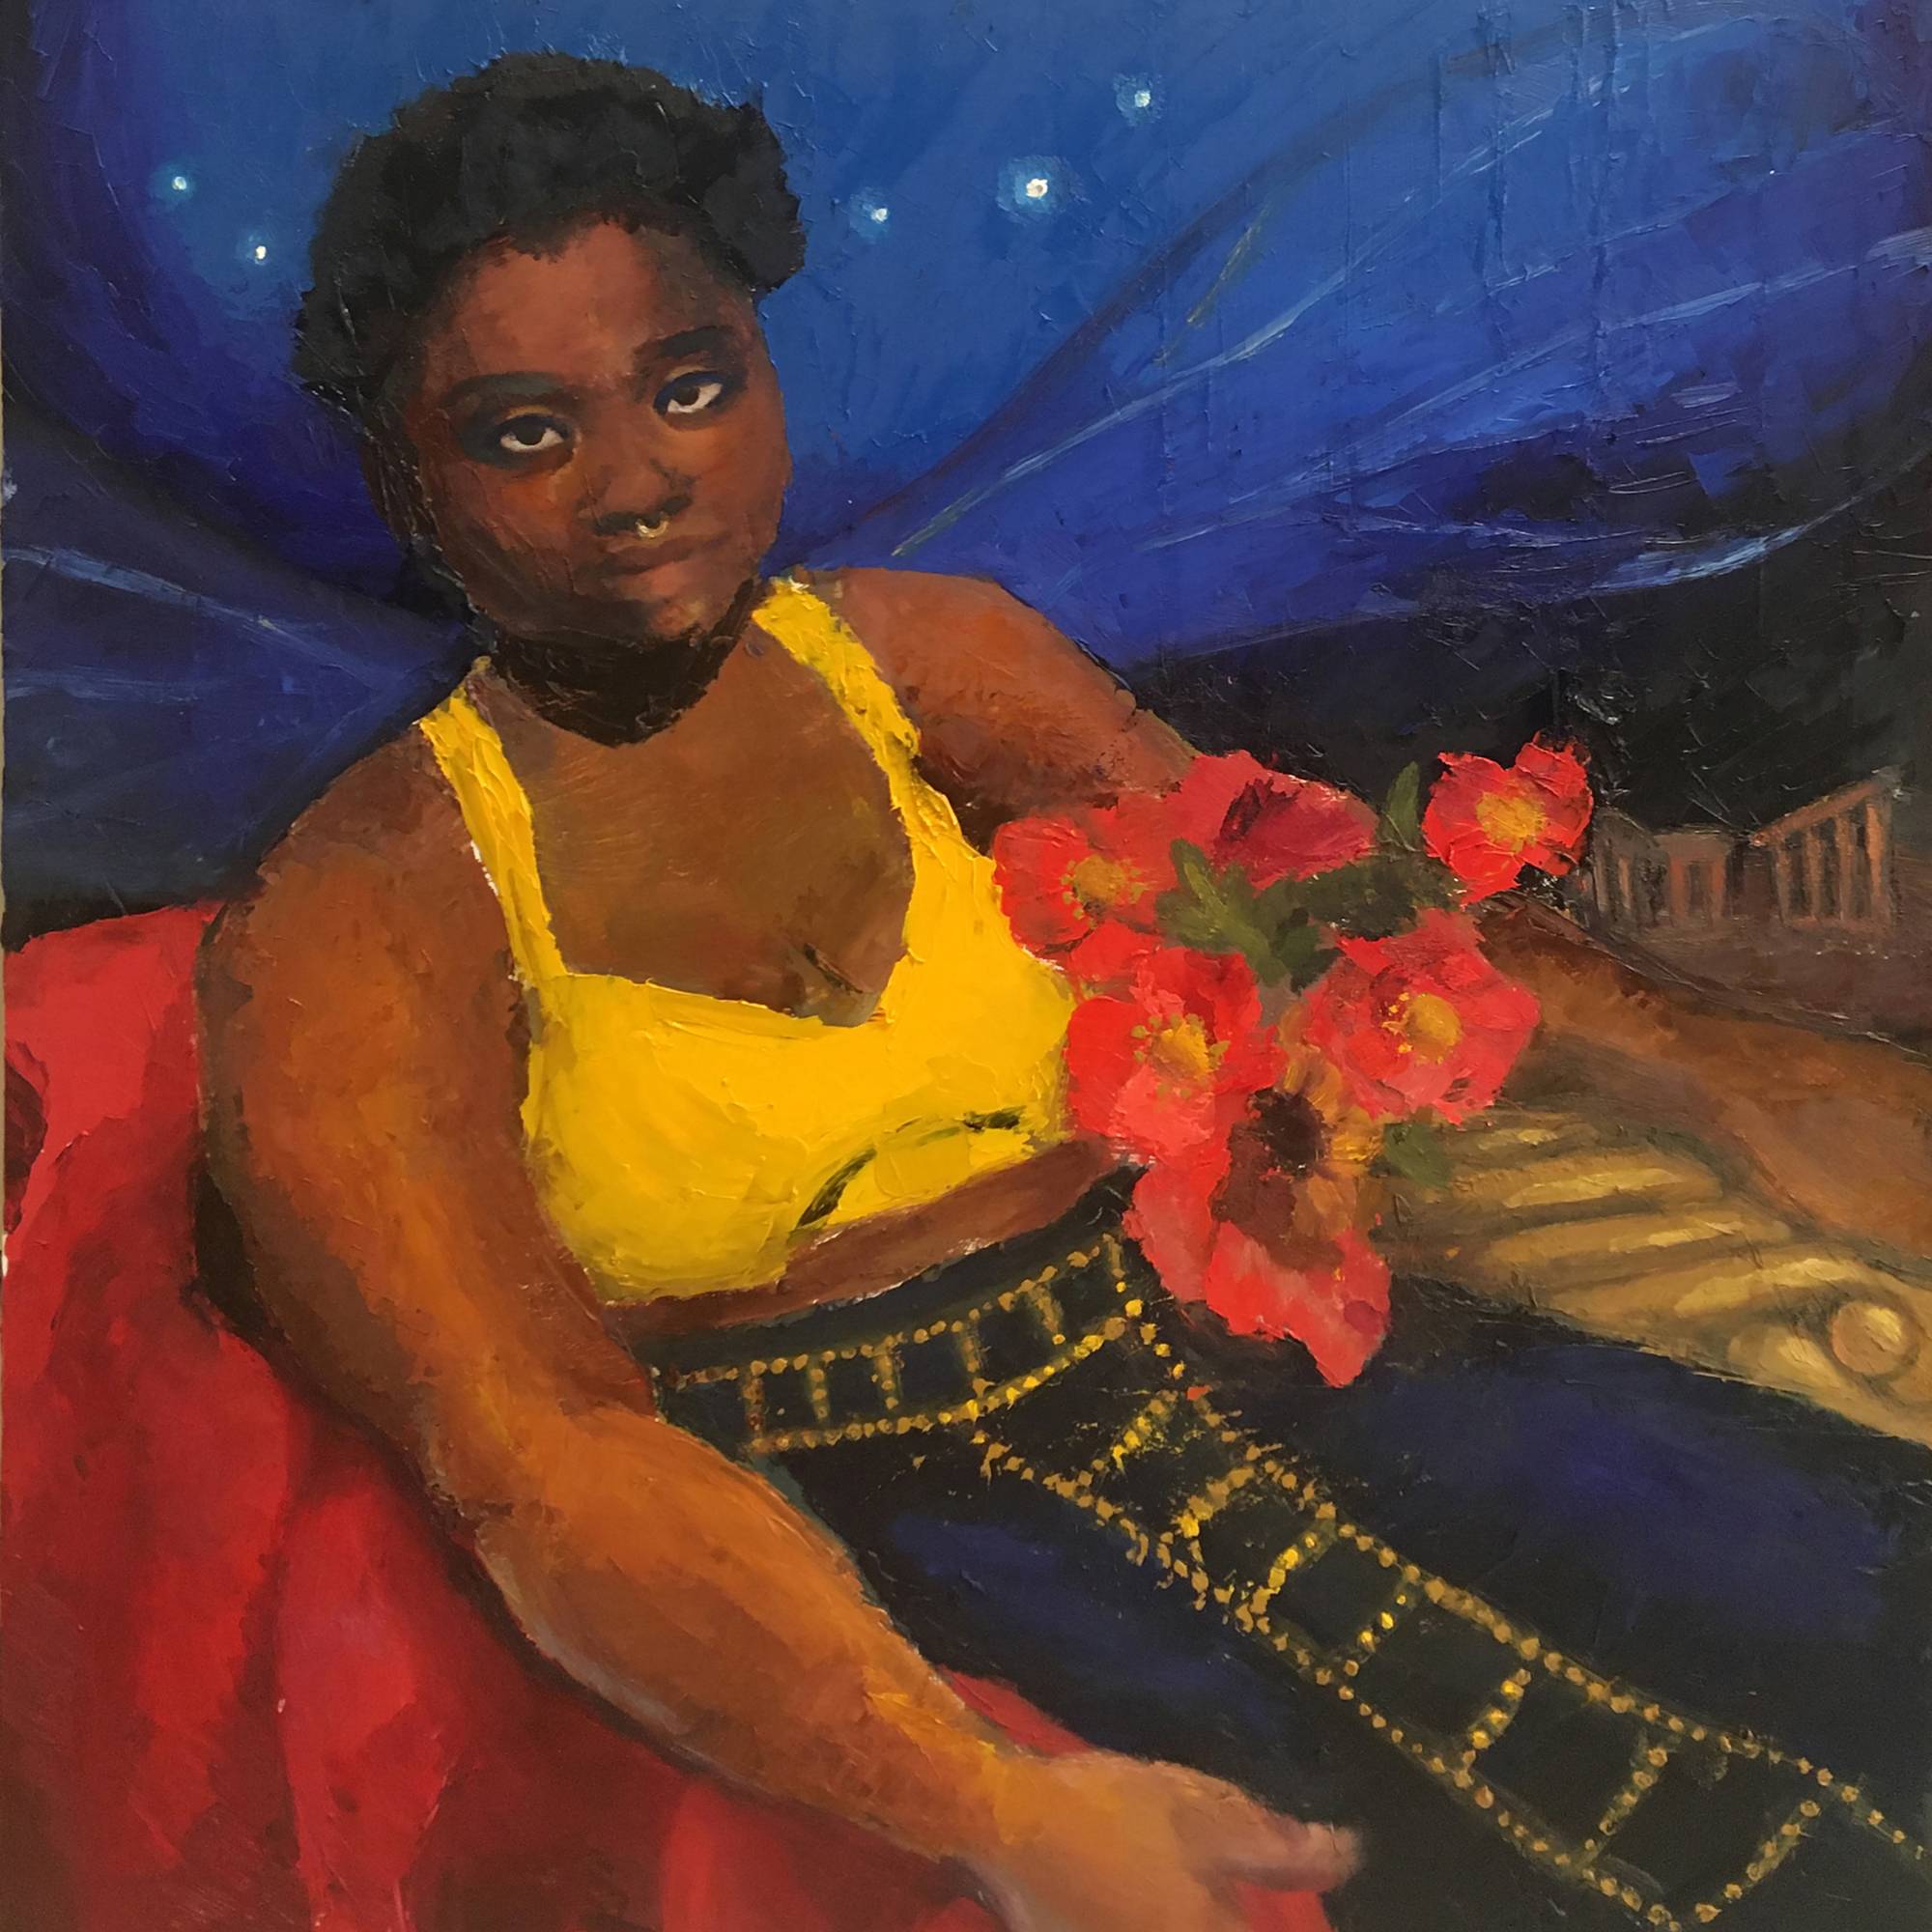 oil painting of young black woman with short hair in yellow top holding red poppies